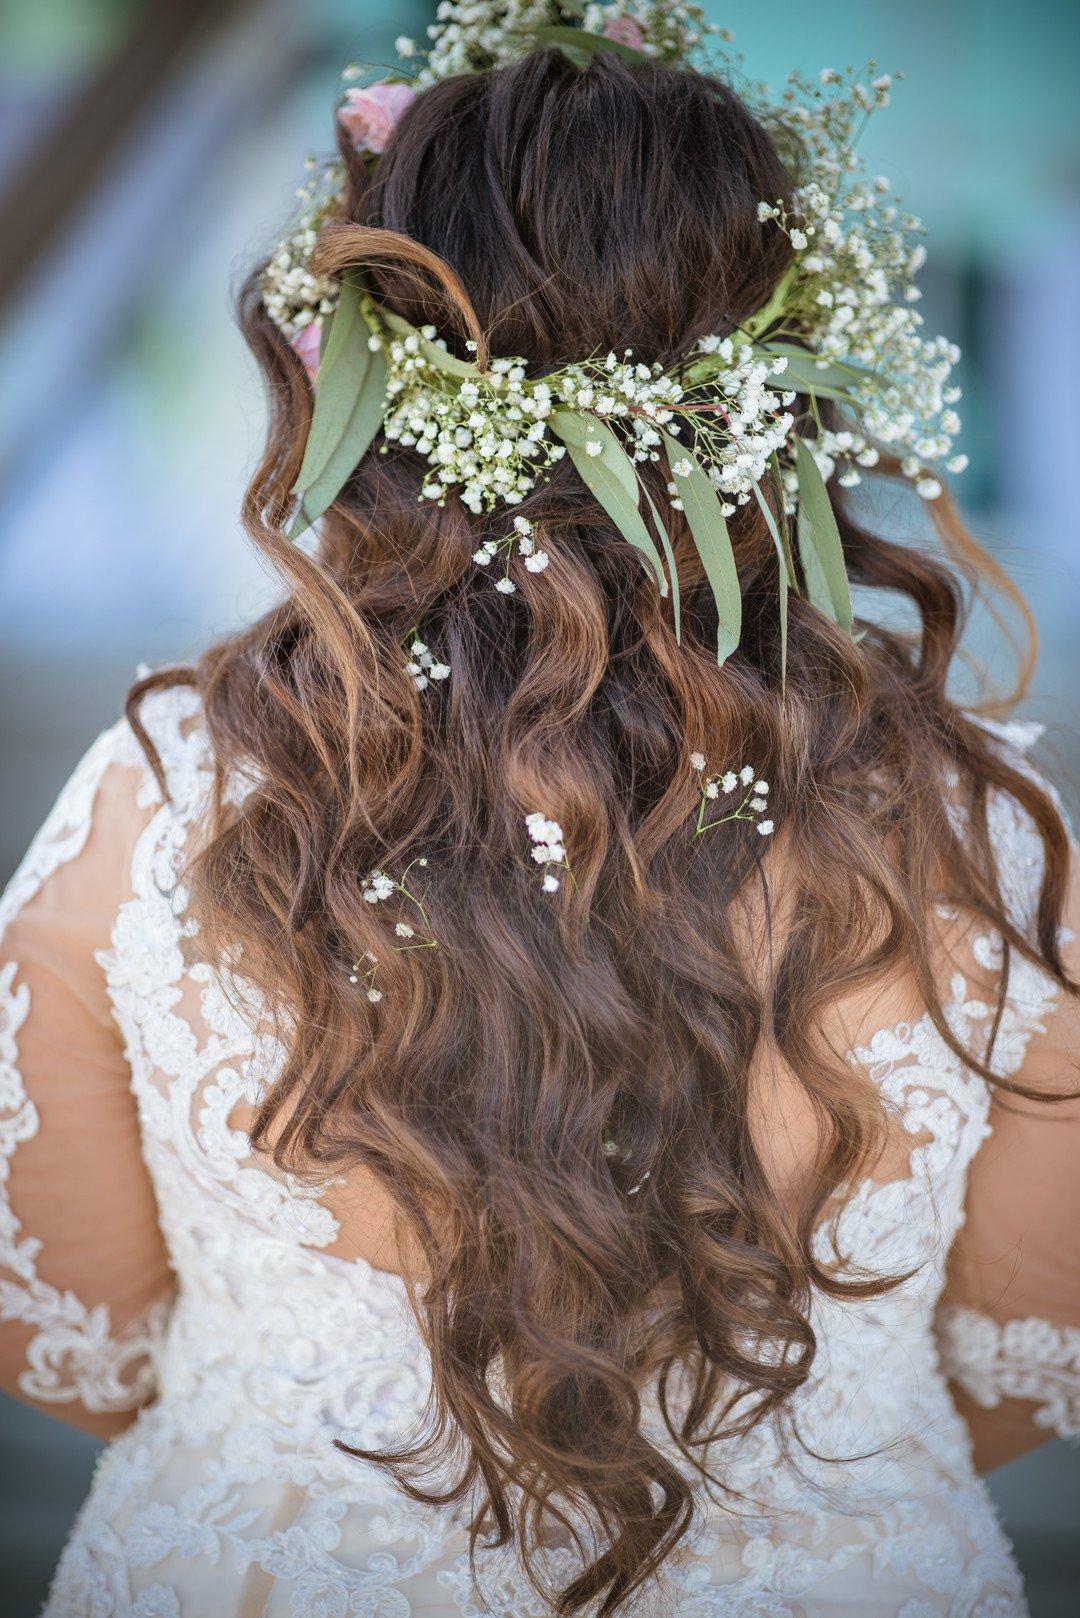 20 Gorgeous Wedding Hairstyles with Flowers - EverAfterGuide